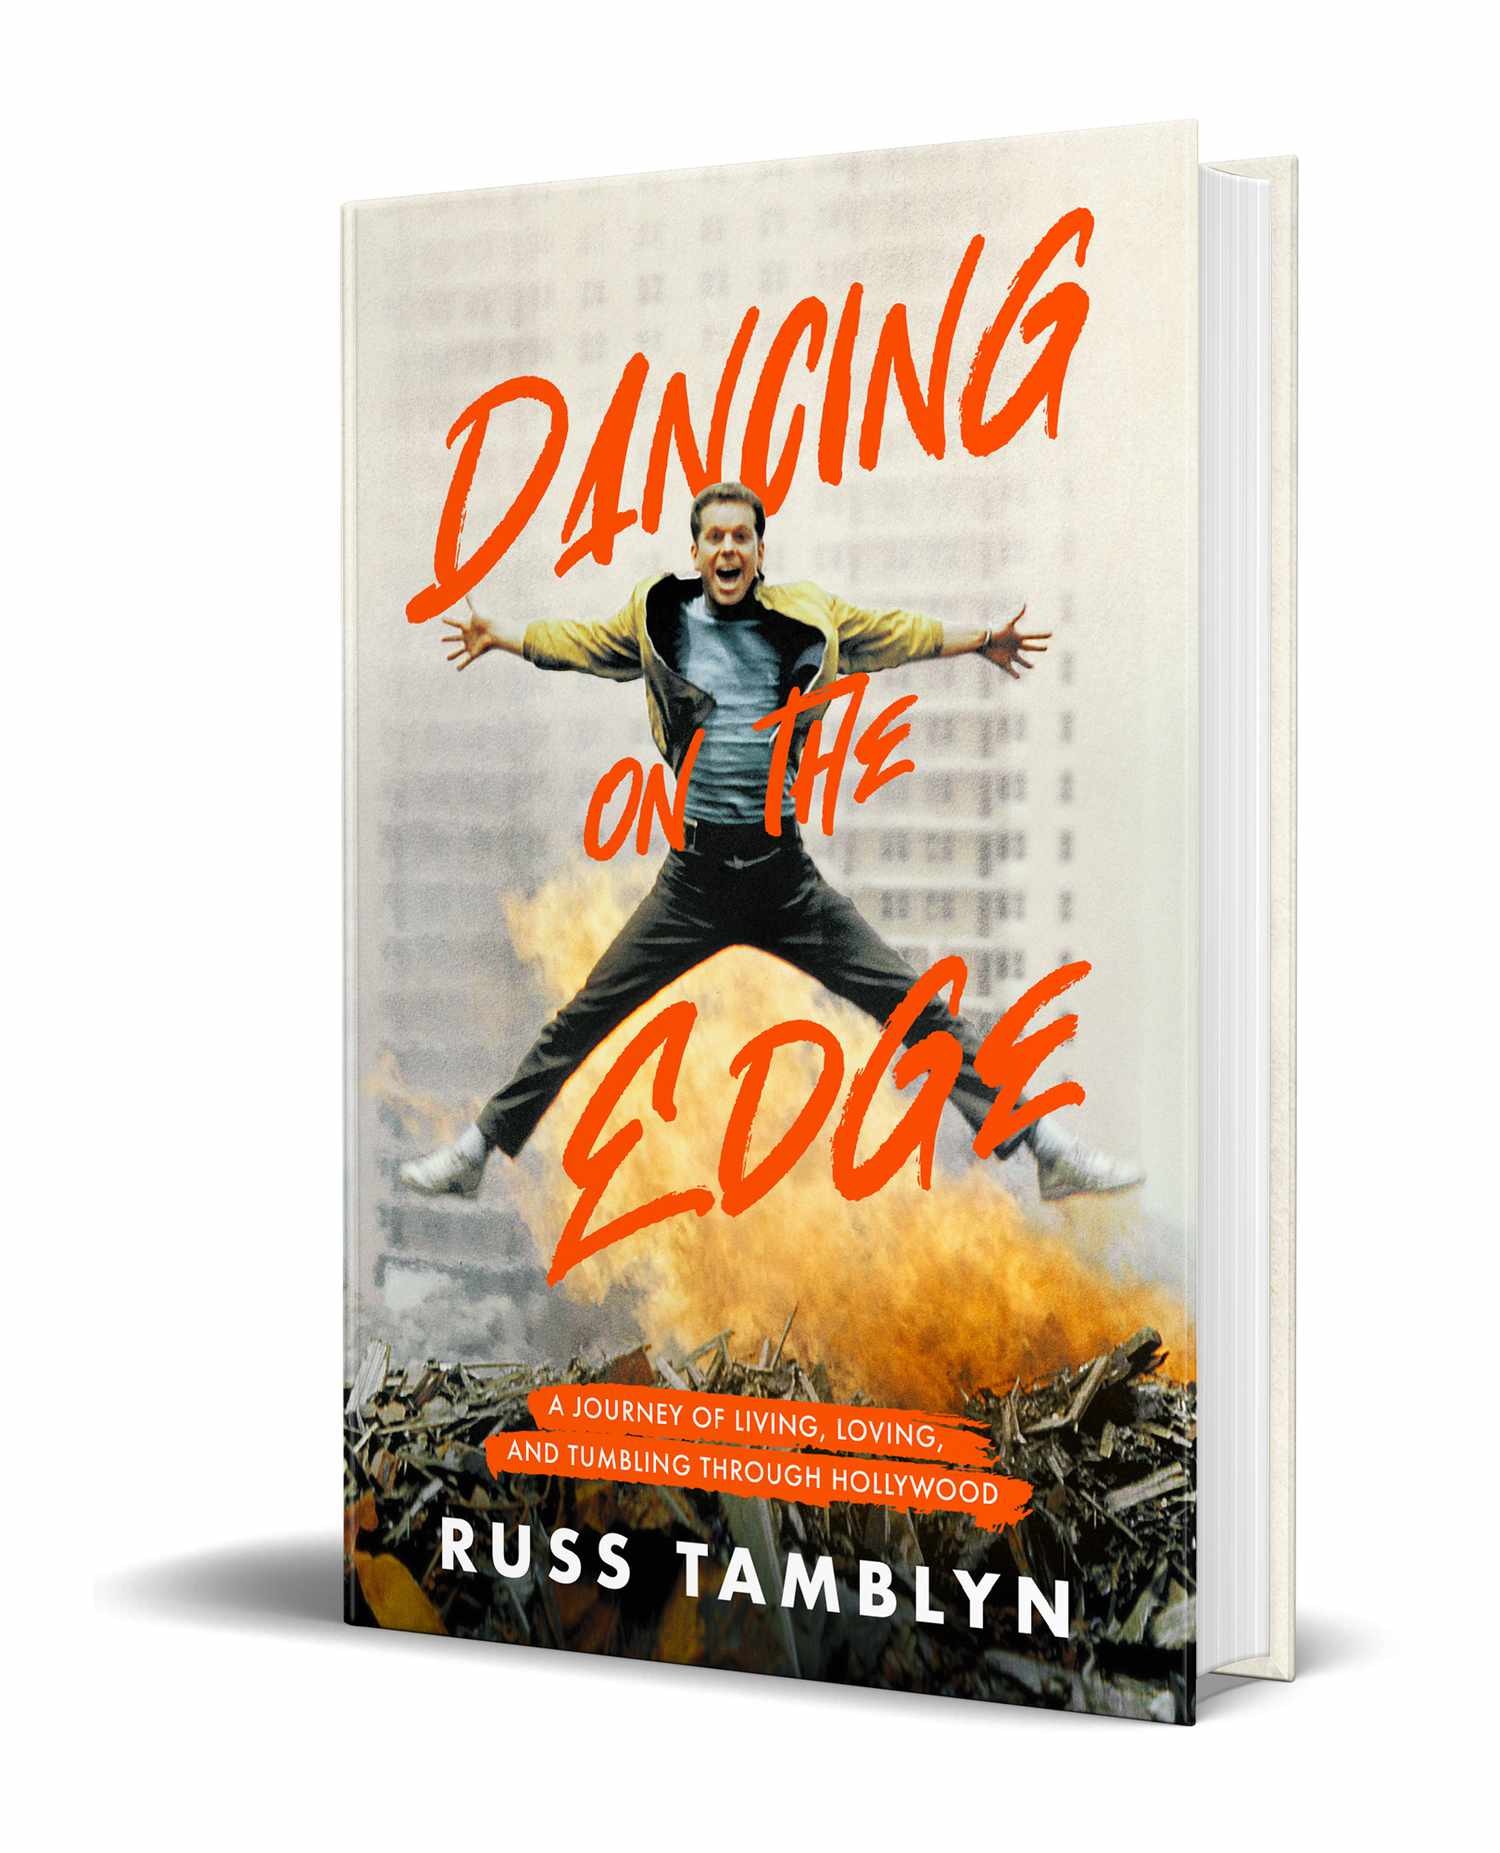 West Side Story Star Russ Tamblyn to Publish Memoir Dancing on the Edge